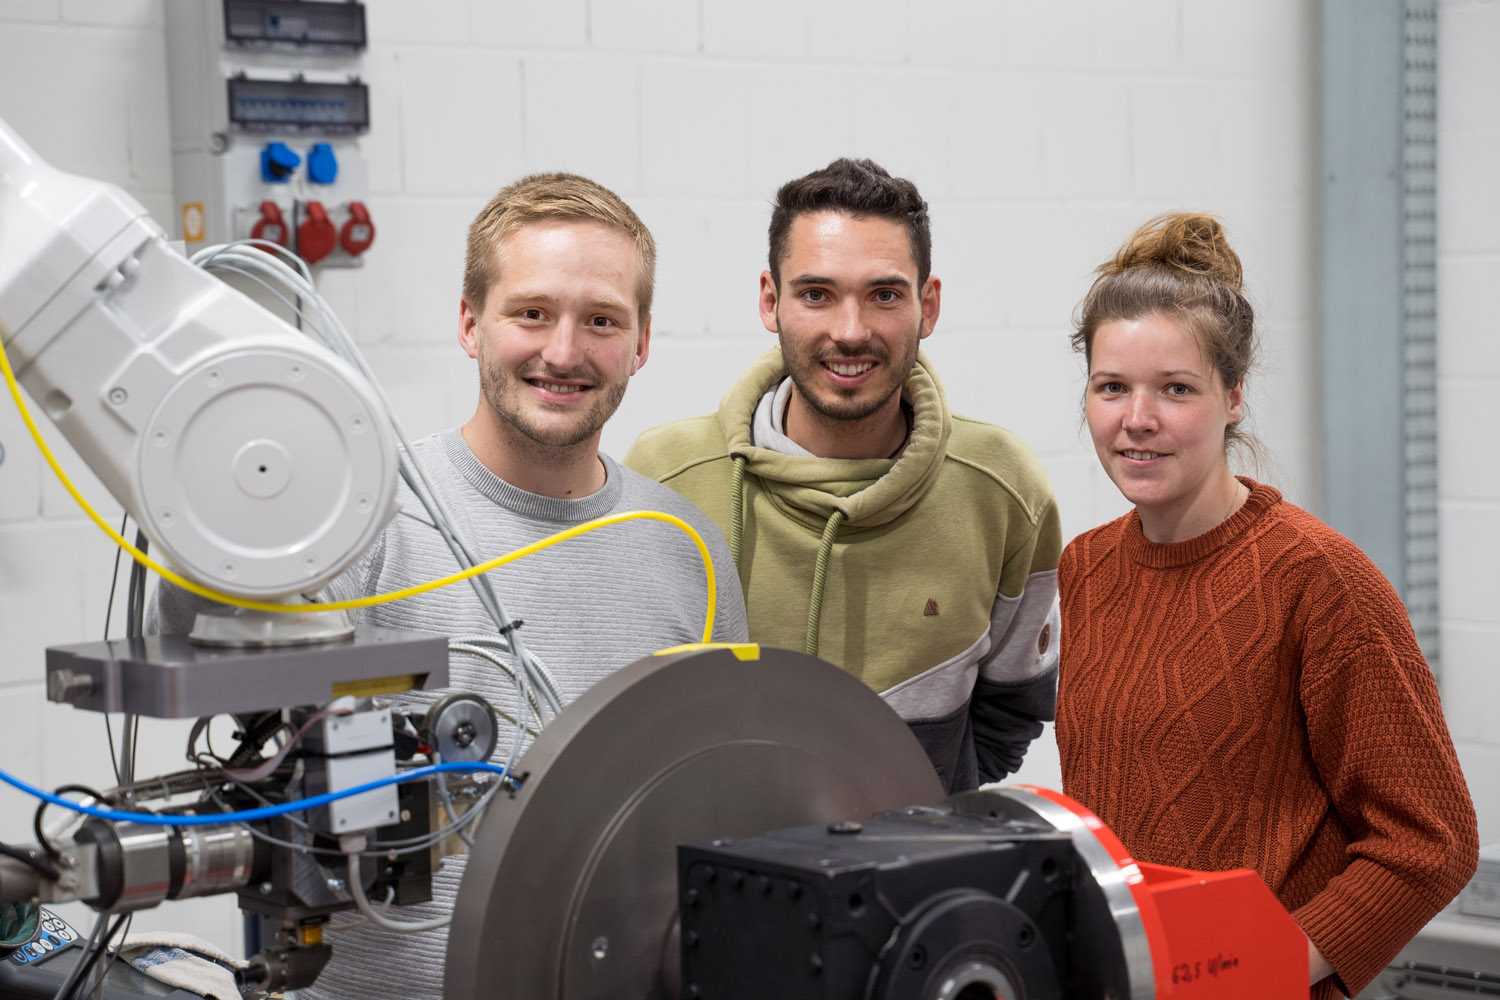 Thorsten Mattulat, Marcel Möbus and Anika Langebeck from the project team in front of the welding robot, picture: WFB/Raveling